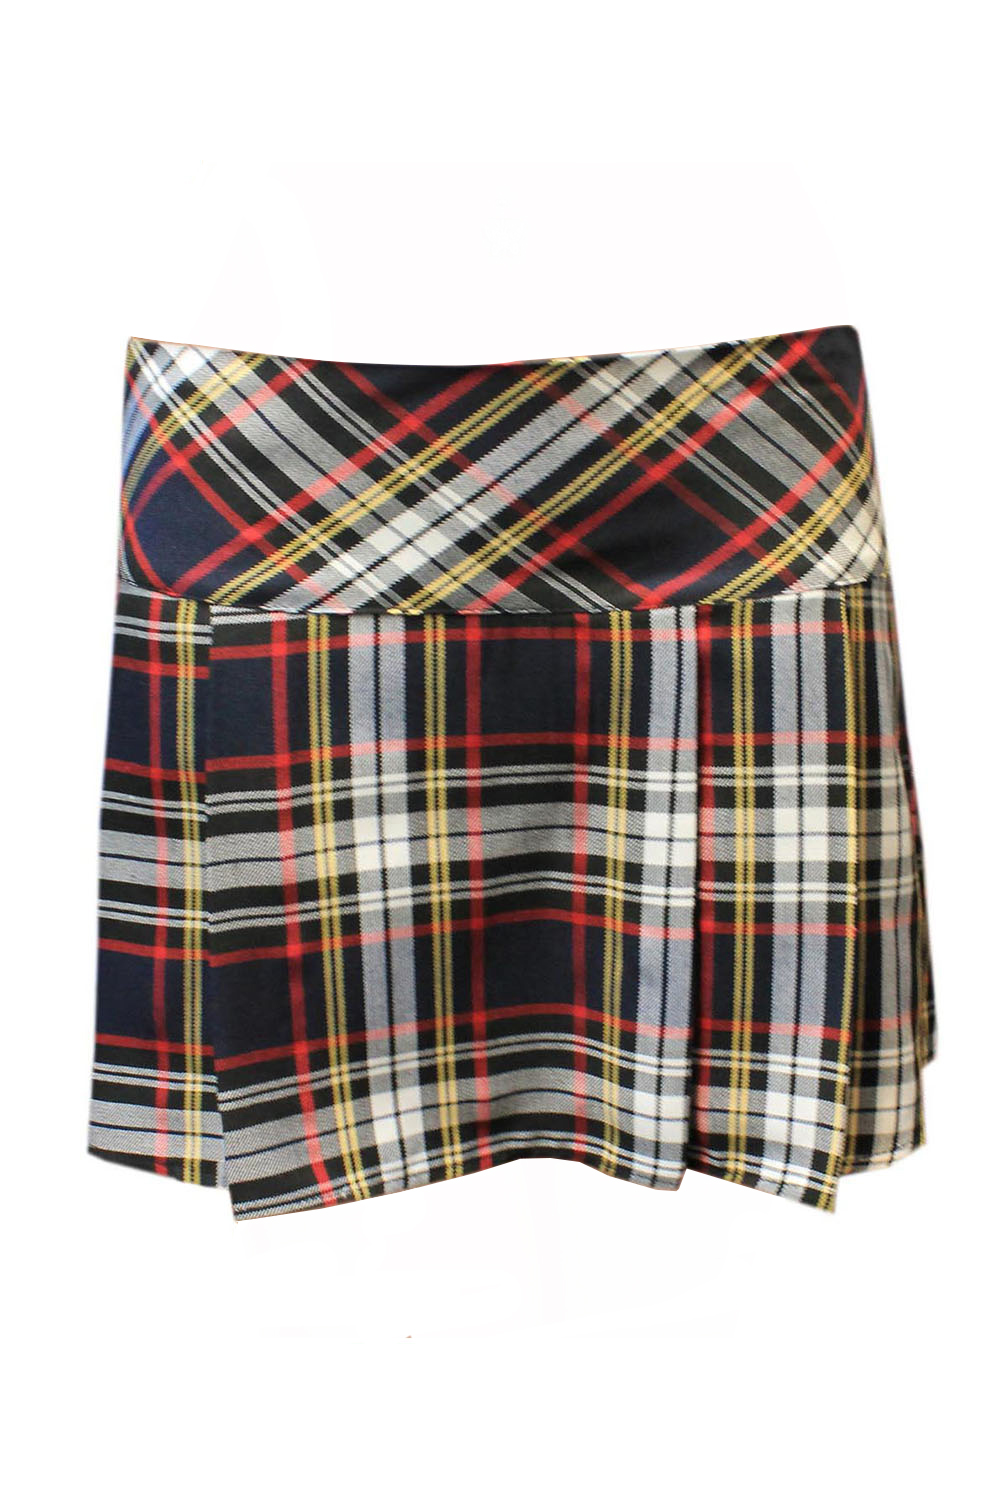 Crazy Chick Adult Box Pleated Black Yellow Tartan Skirt (14 Inches)